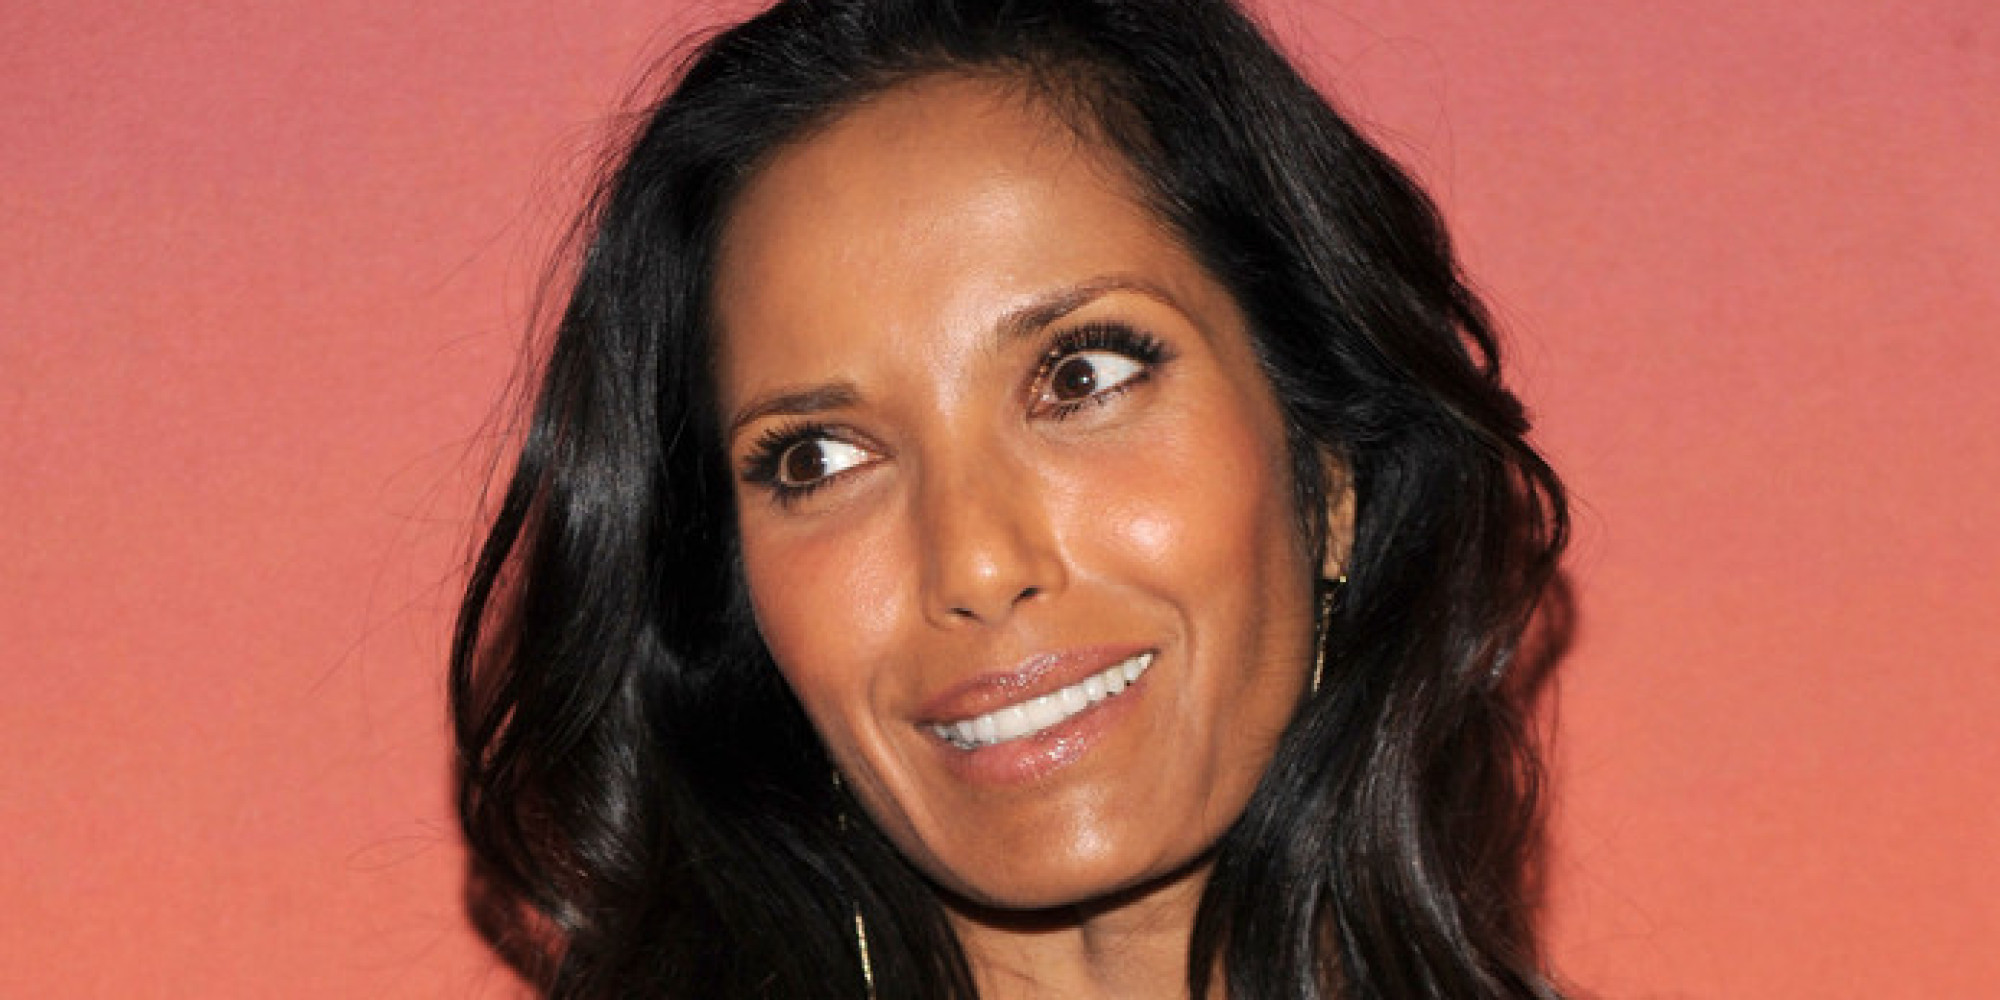 Padma Lakshmi Talks Weight Gain And Staying Fit During 'Top Chef' | HuffPost